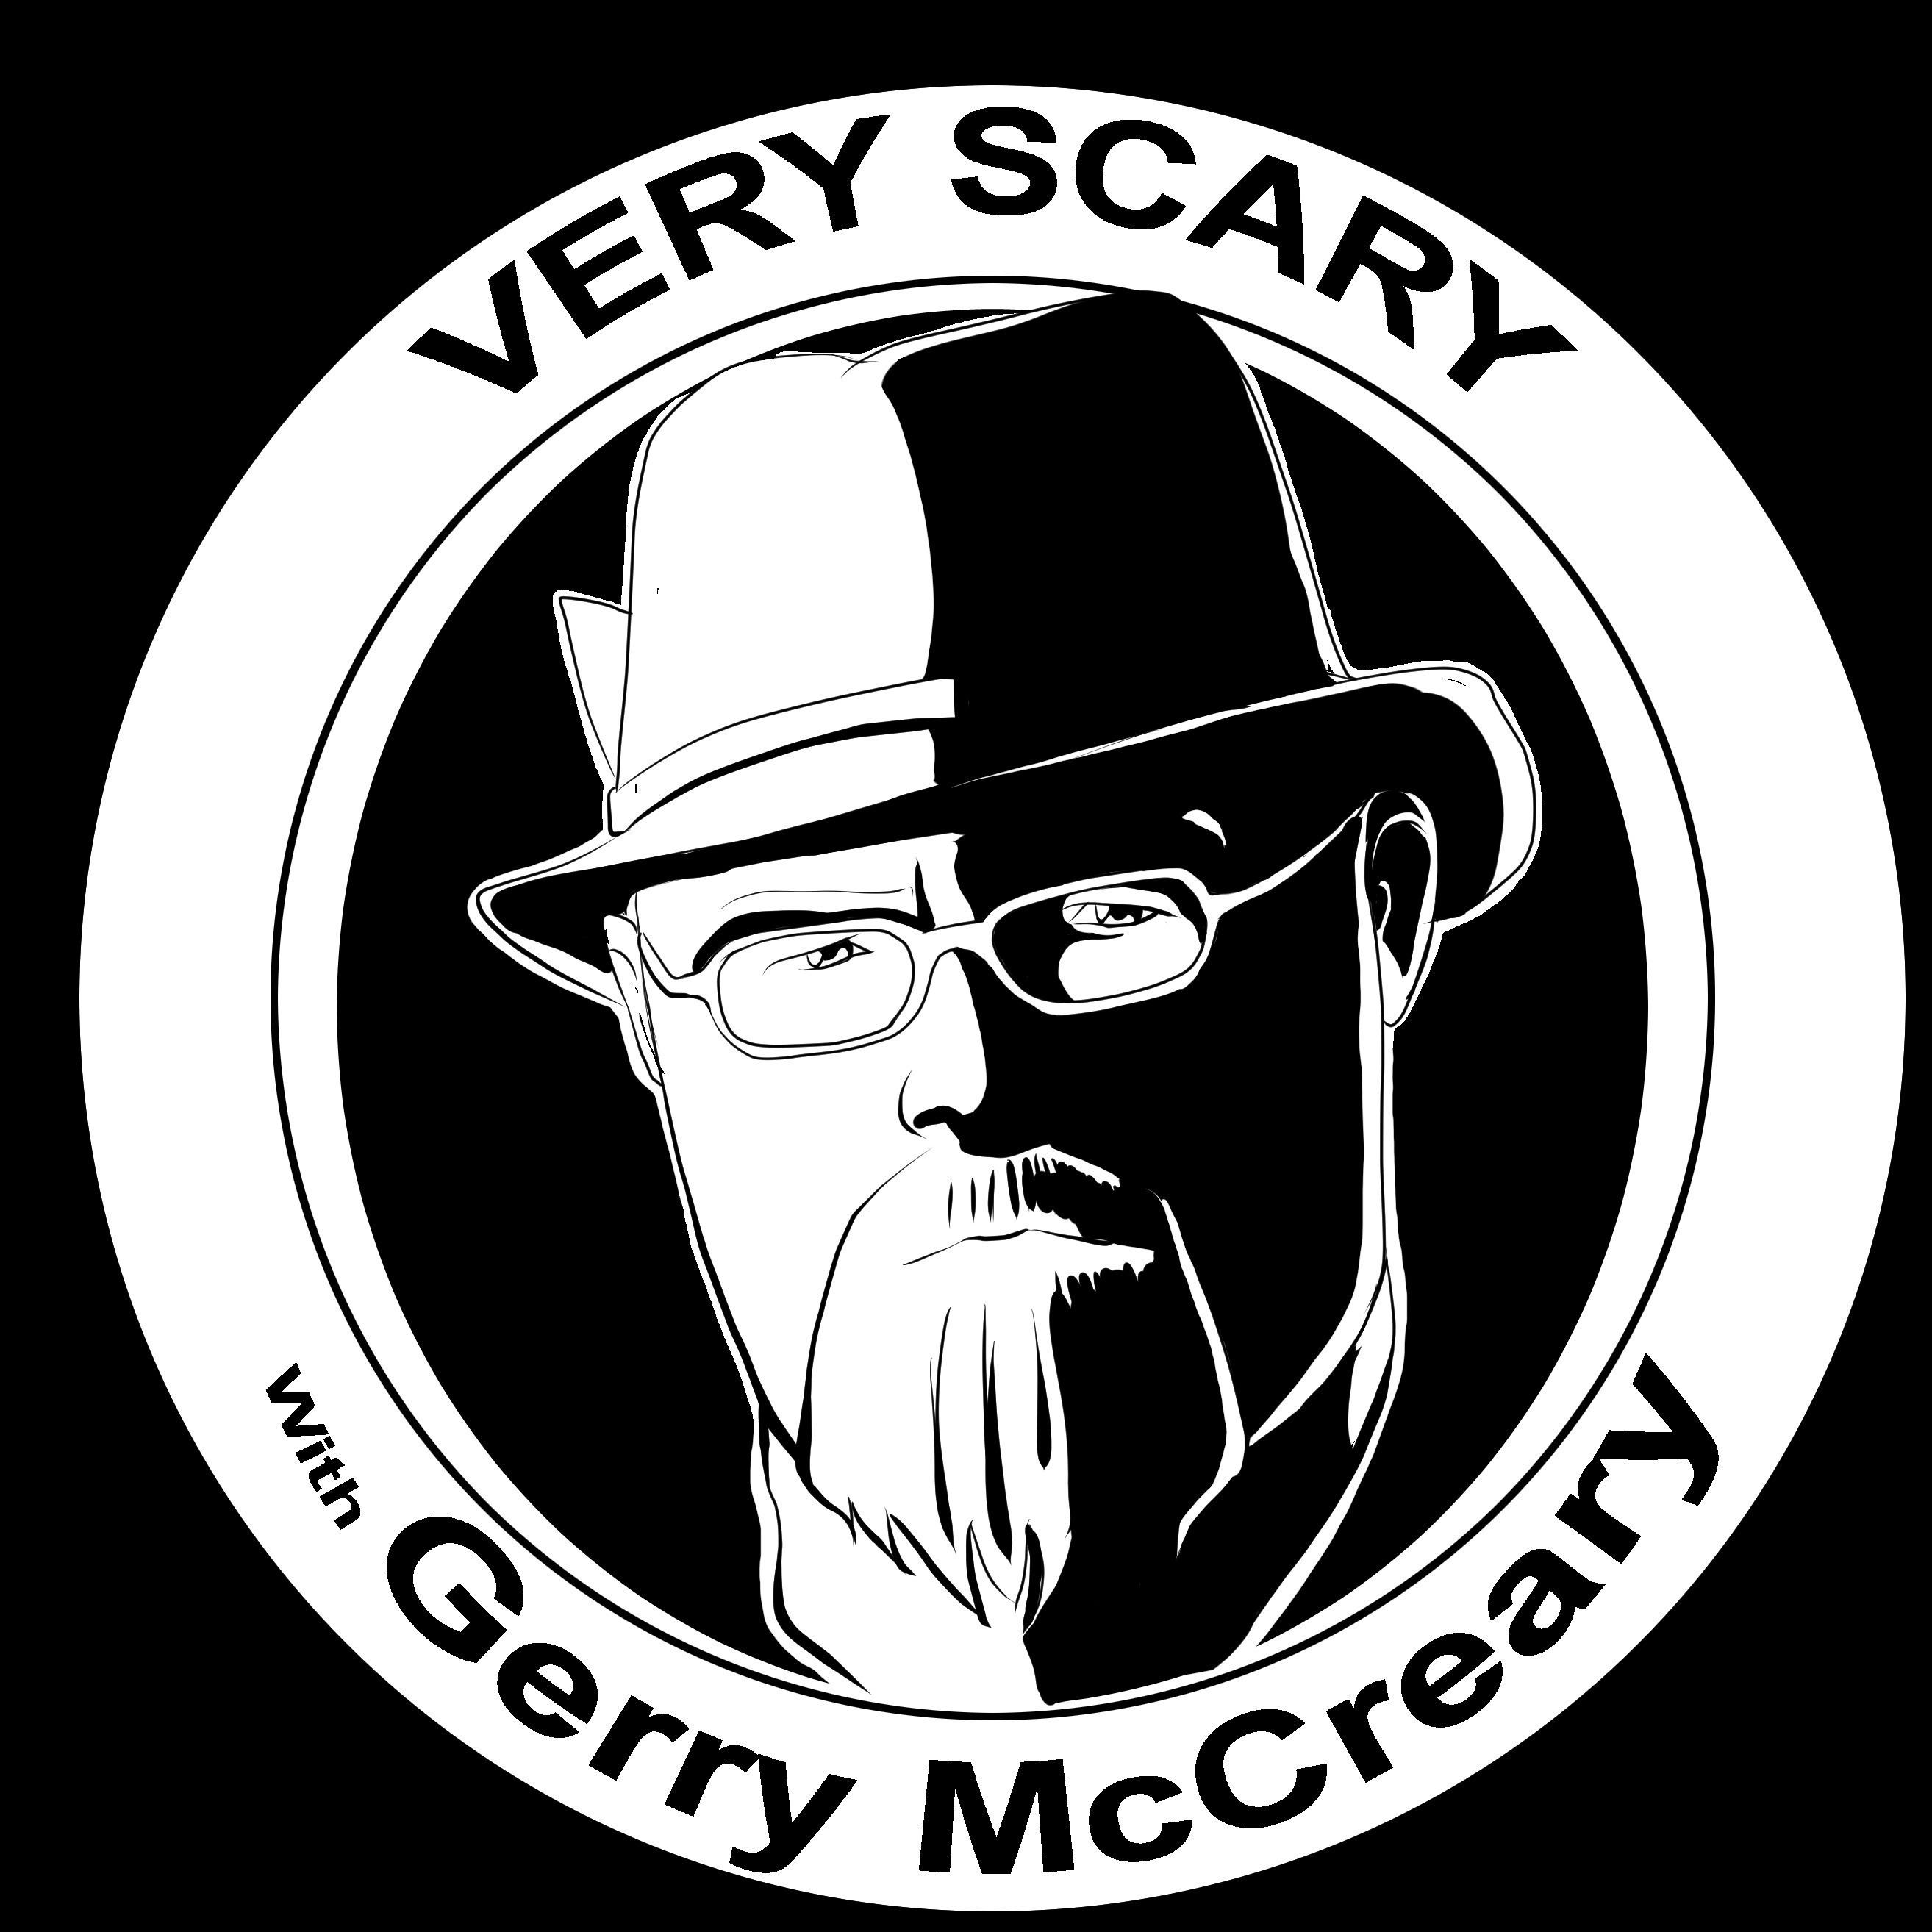 Very Scary with Gerry McCreary